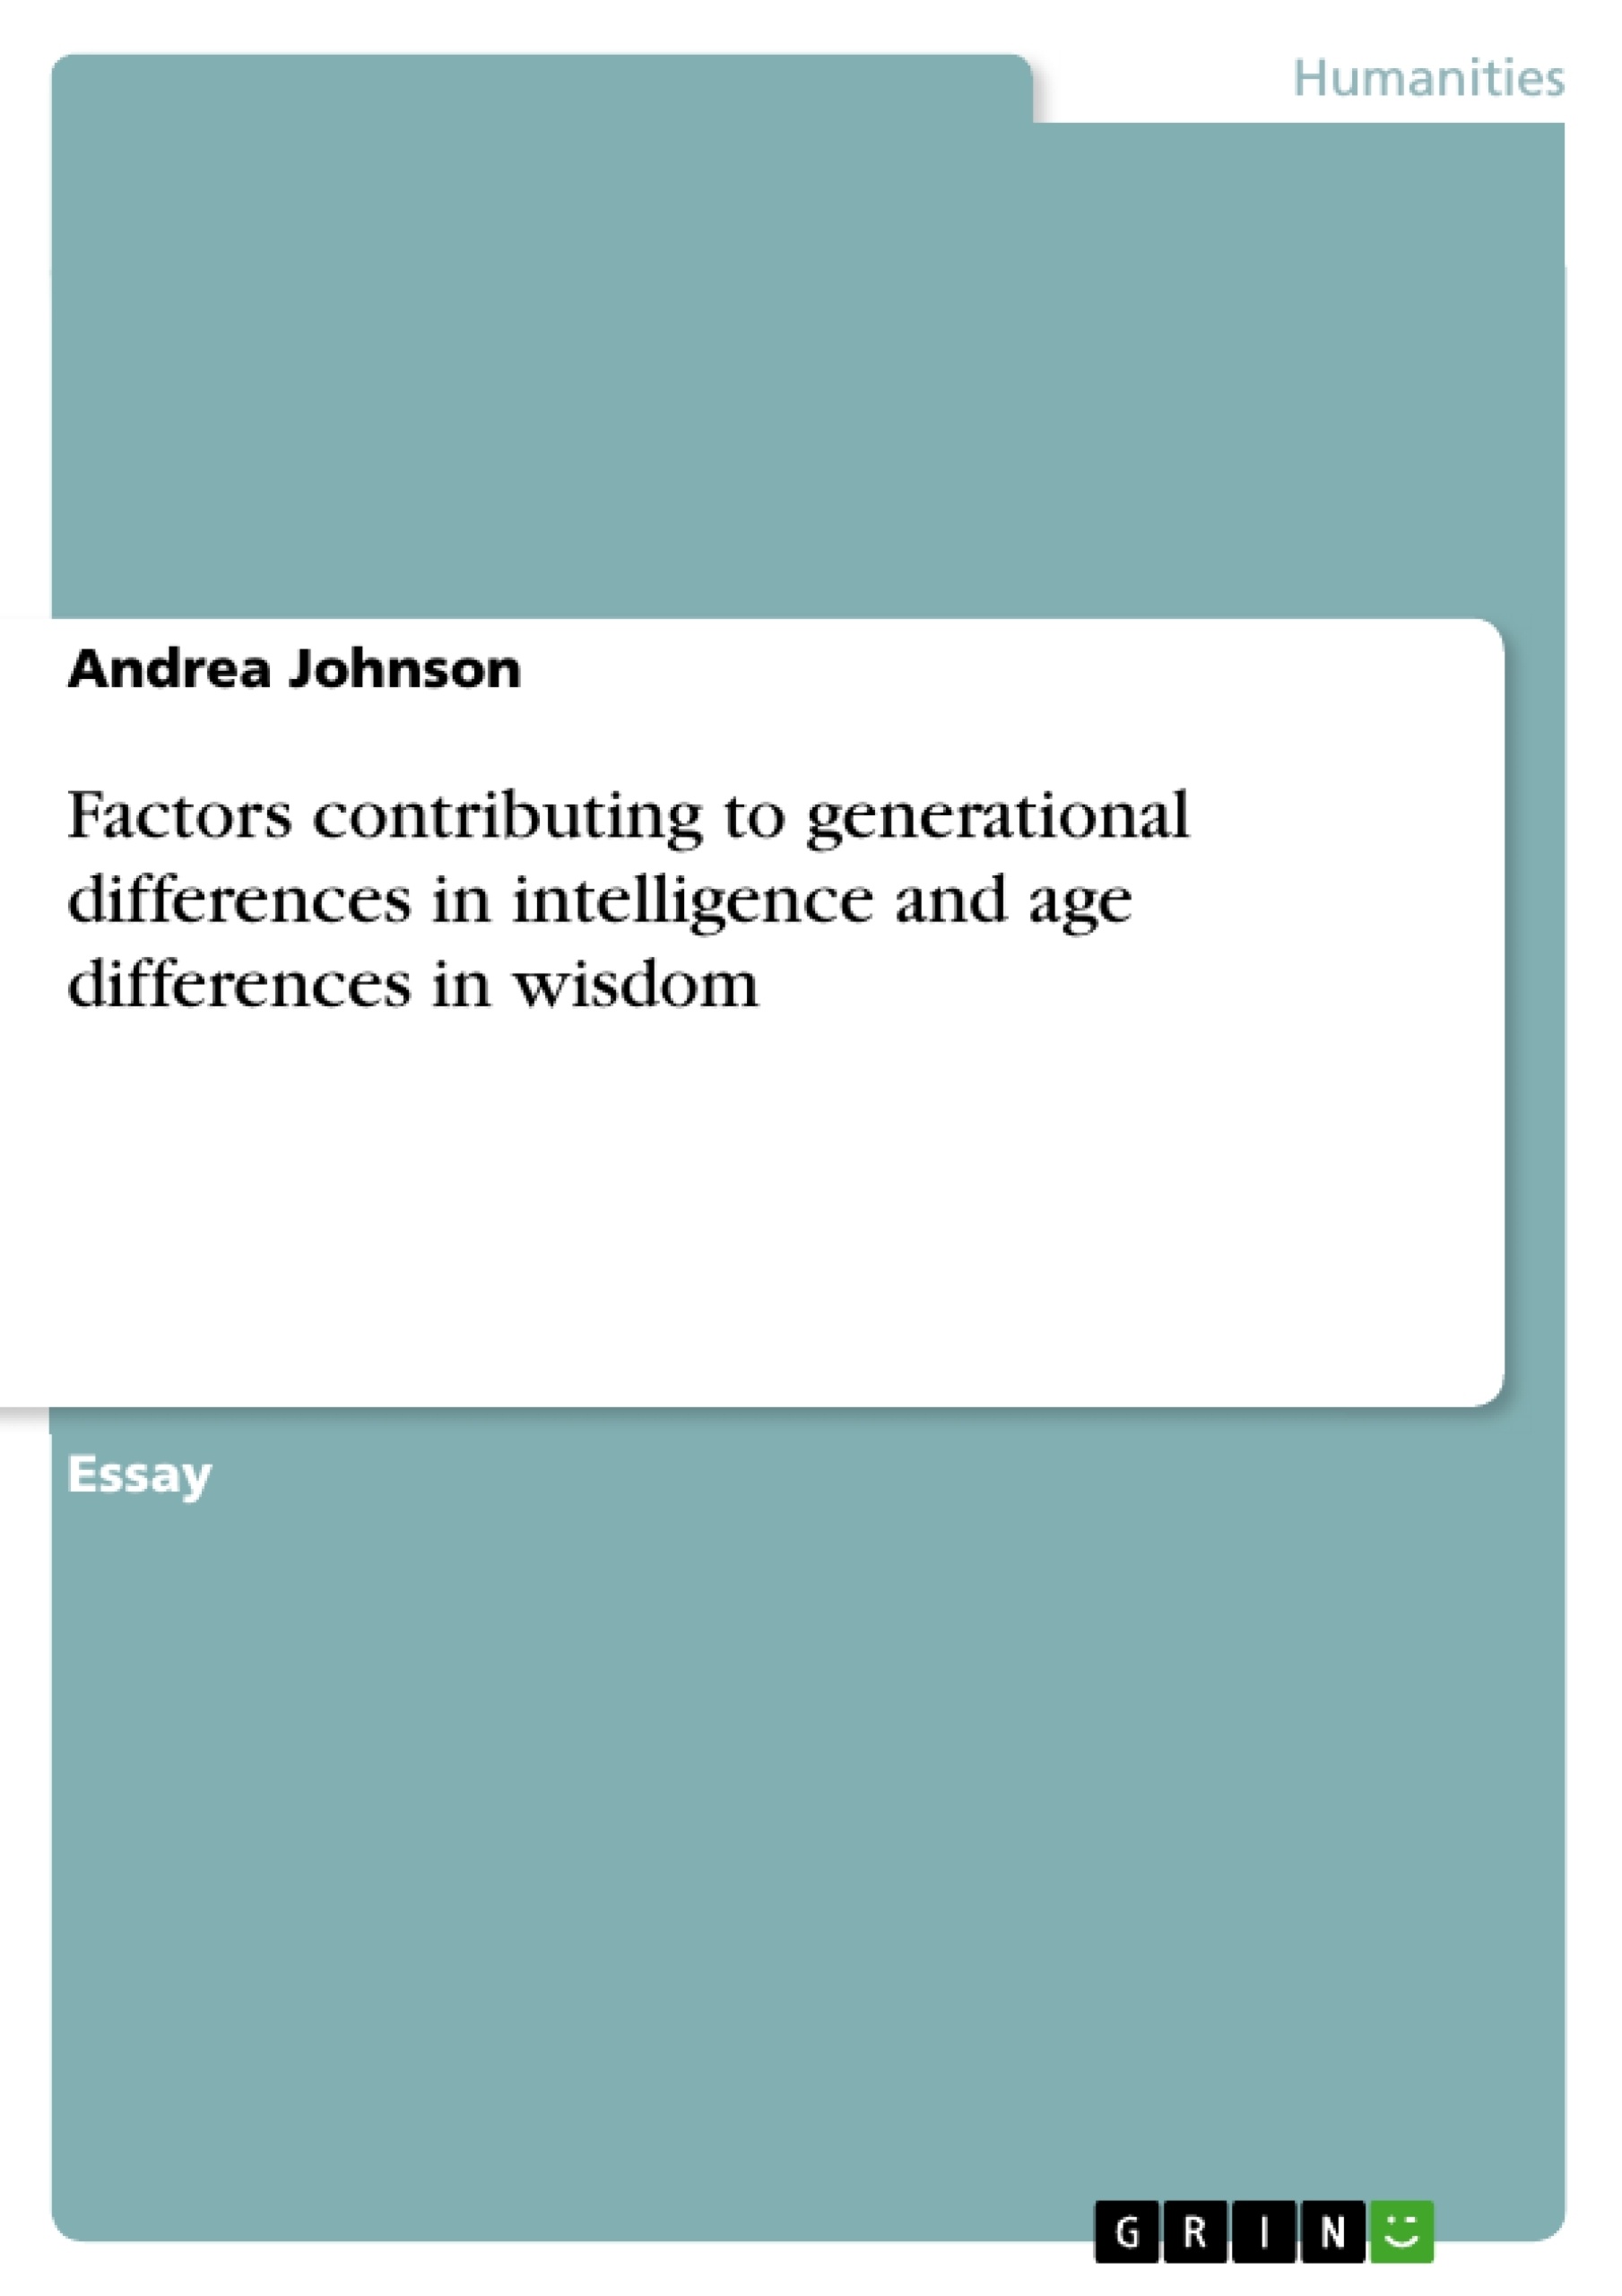 Titel: Factors contributing to generational differences in intelligence and age differences in wisdom